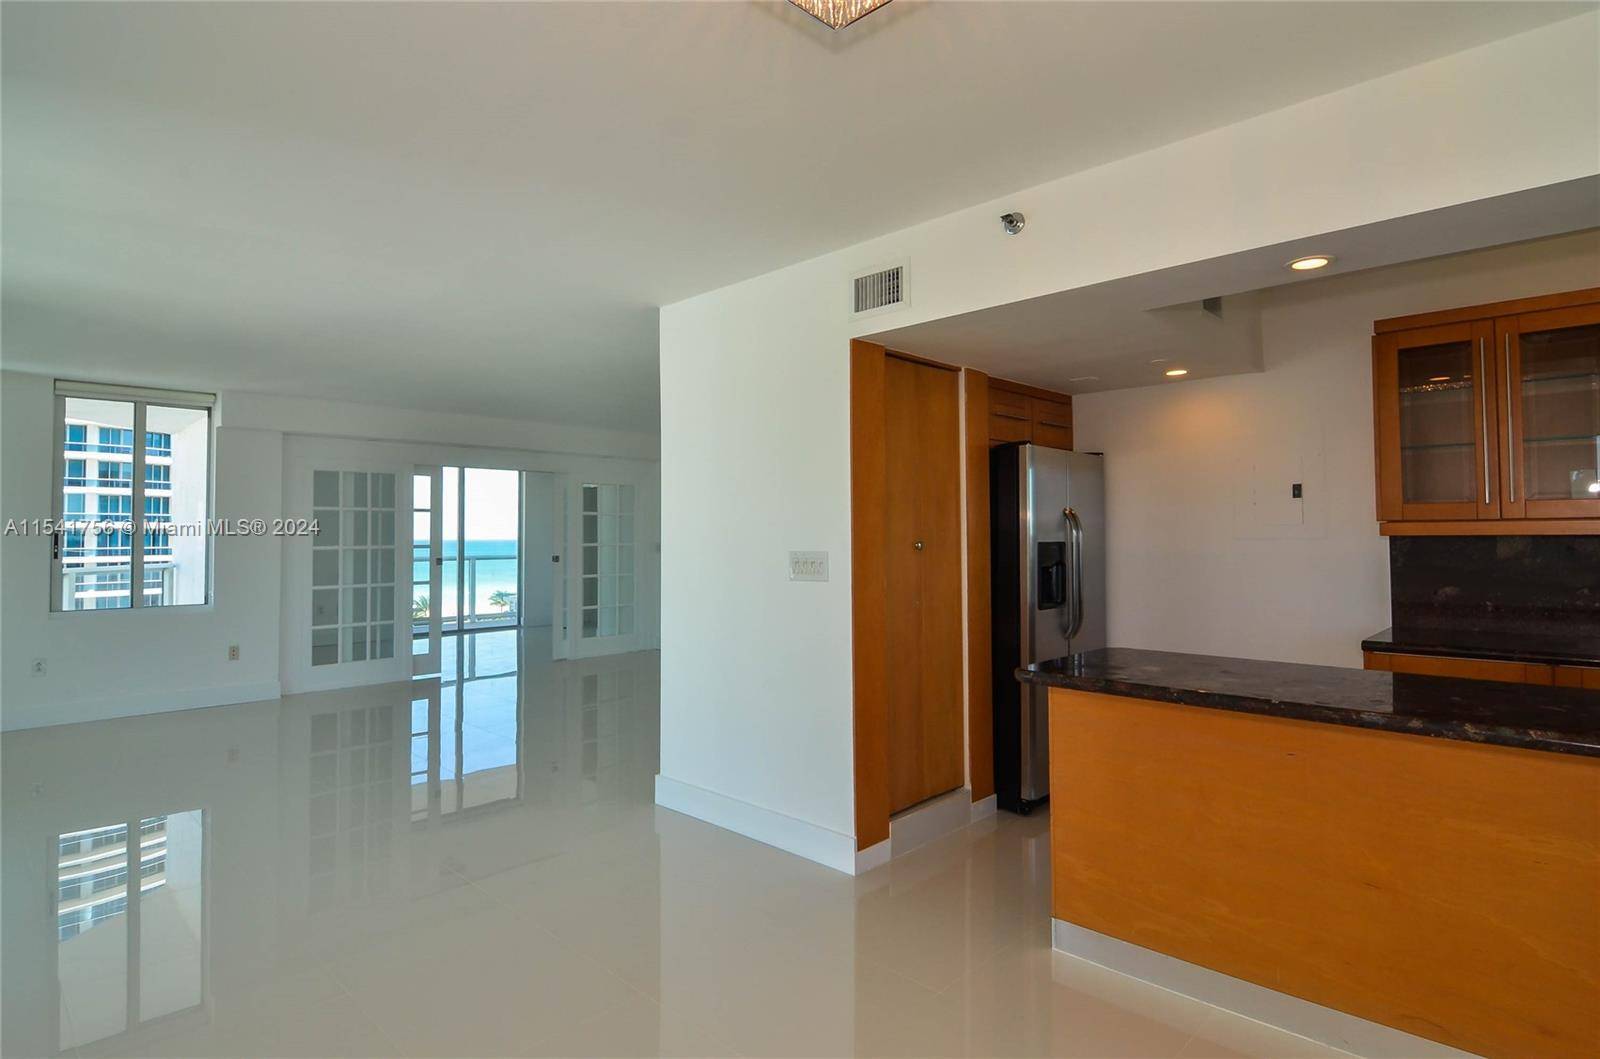 Amazing ocean and intracoastal views from this 3 bedroom 2 bathroom unit private elevator and foyer entrance.